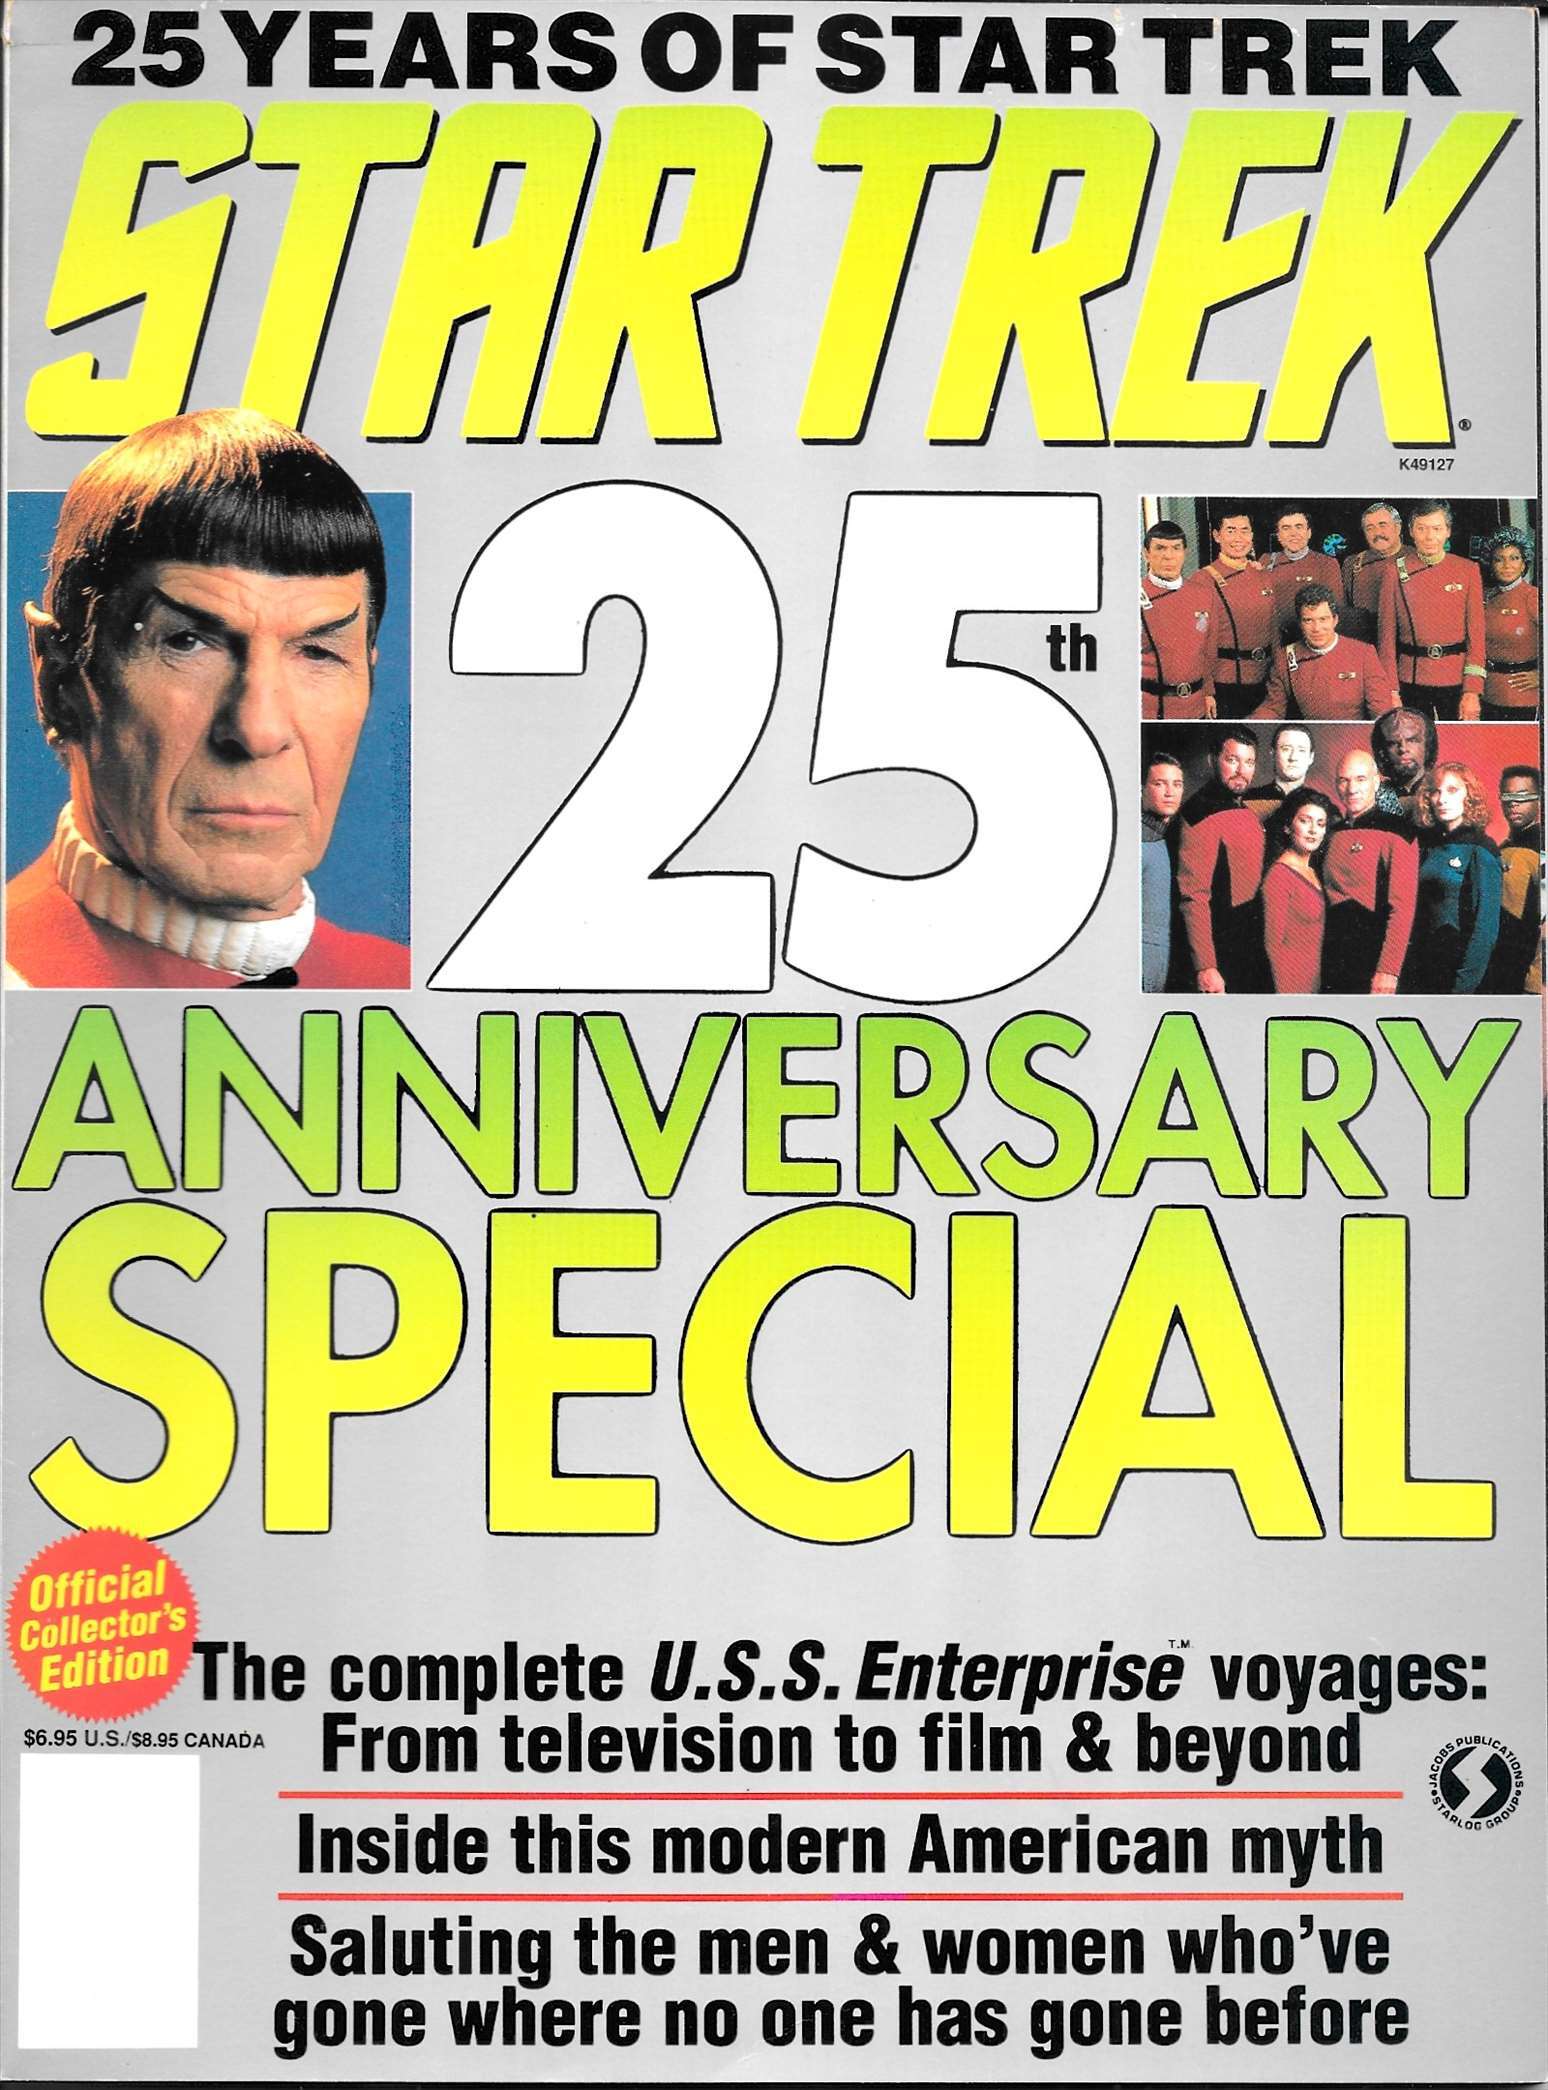 Comic　Collectibles　The　#1　FN　25th　Magazines　Anniversary　Official　Trek　Paramount　Star　Special,　HipComic